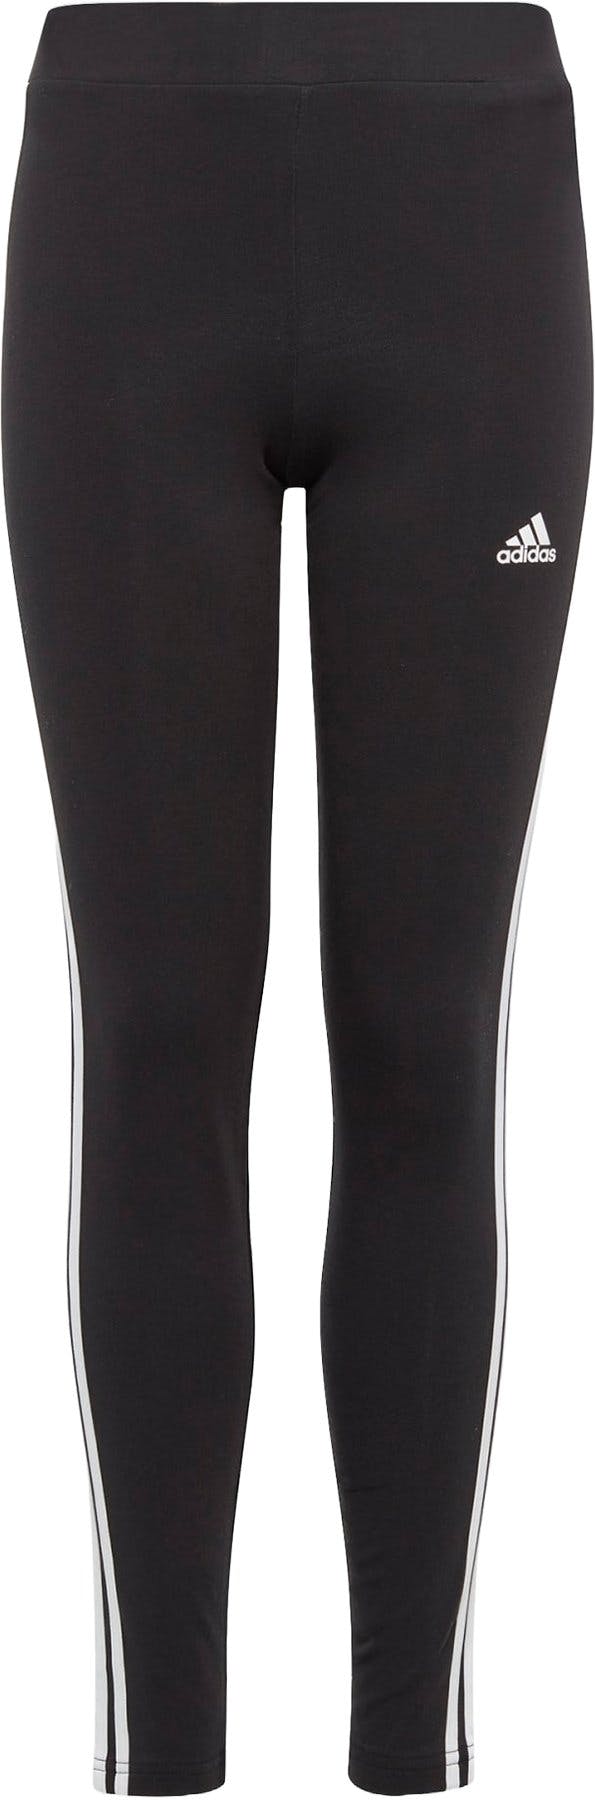 Product image for Essentials 3-Stripes Cotton Tights - Girls